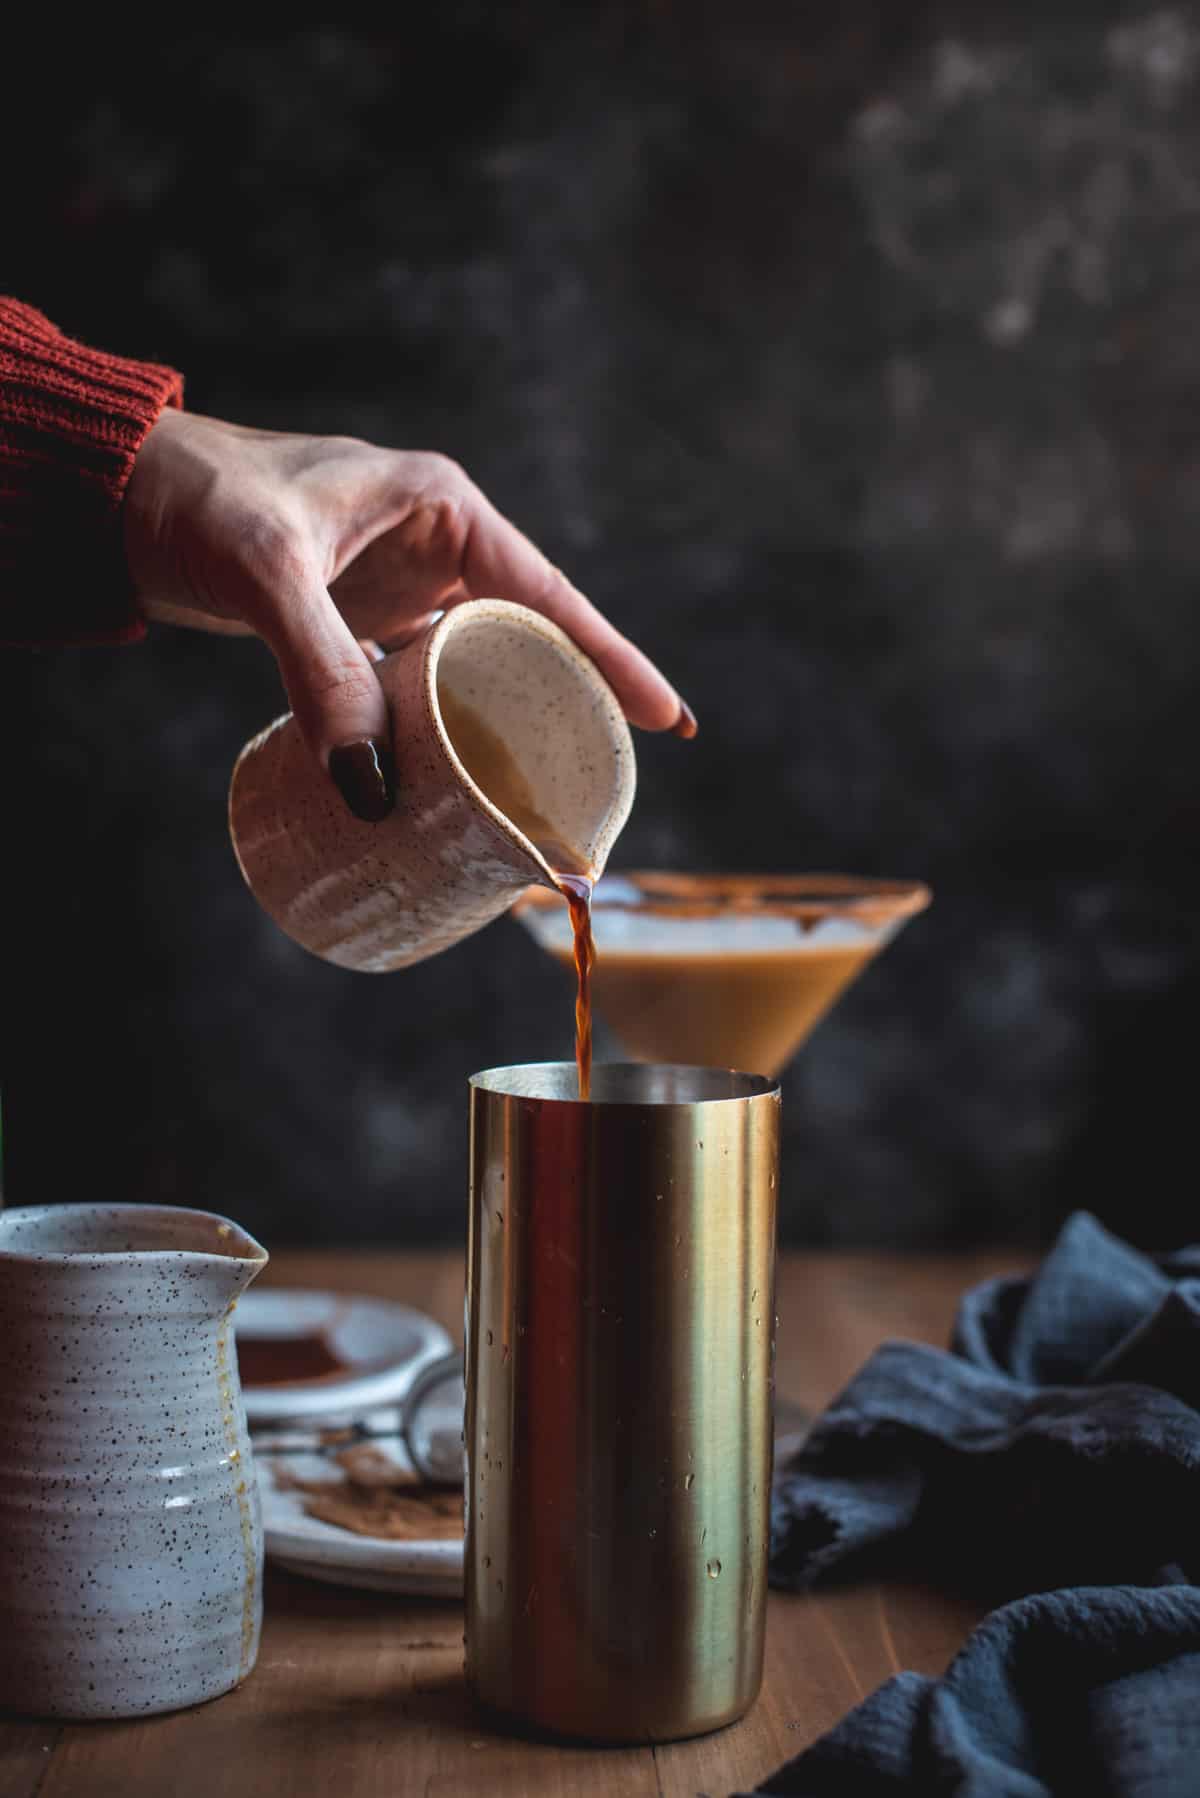 Espresso is being poured into a metal cocktail shaker base. There are some other ingredients laying around this image like a white ceramic jug and material. There is also a finished cocktail in the background.